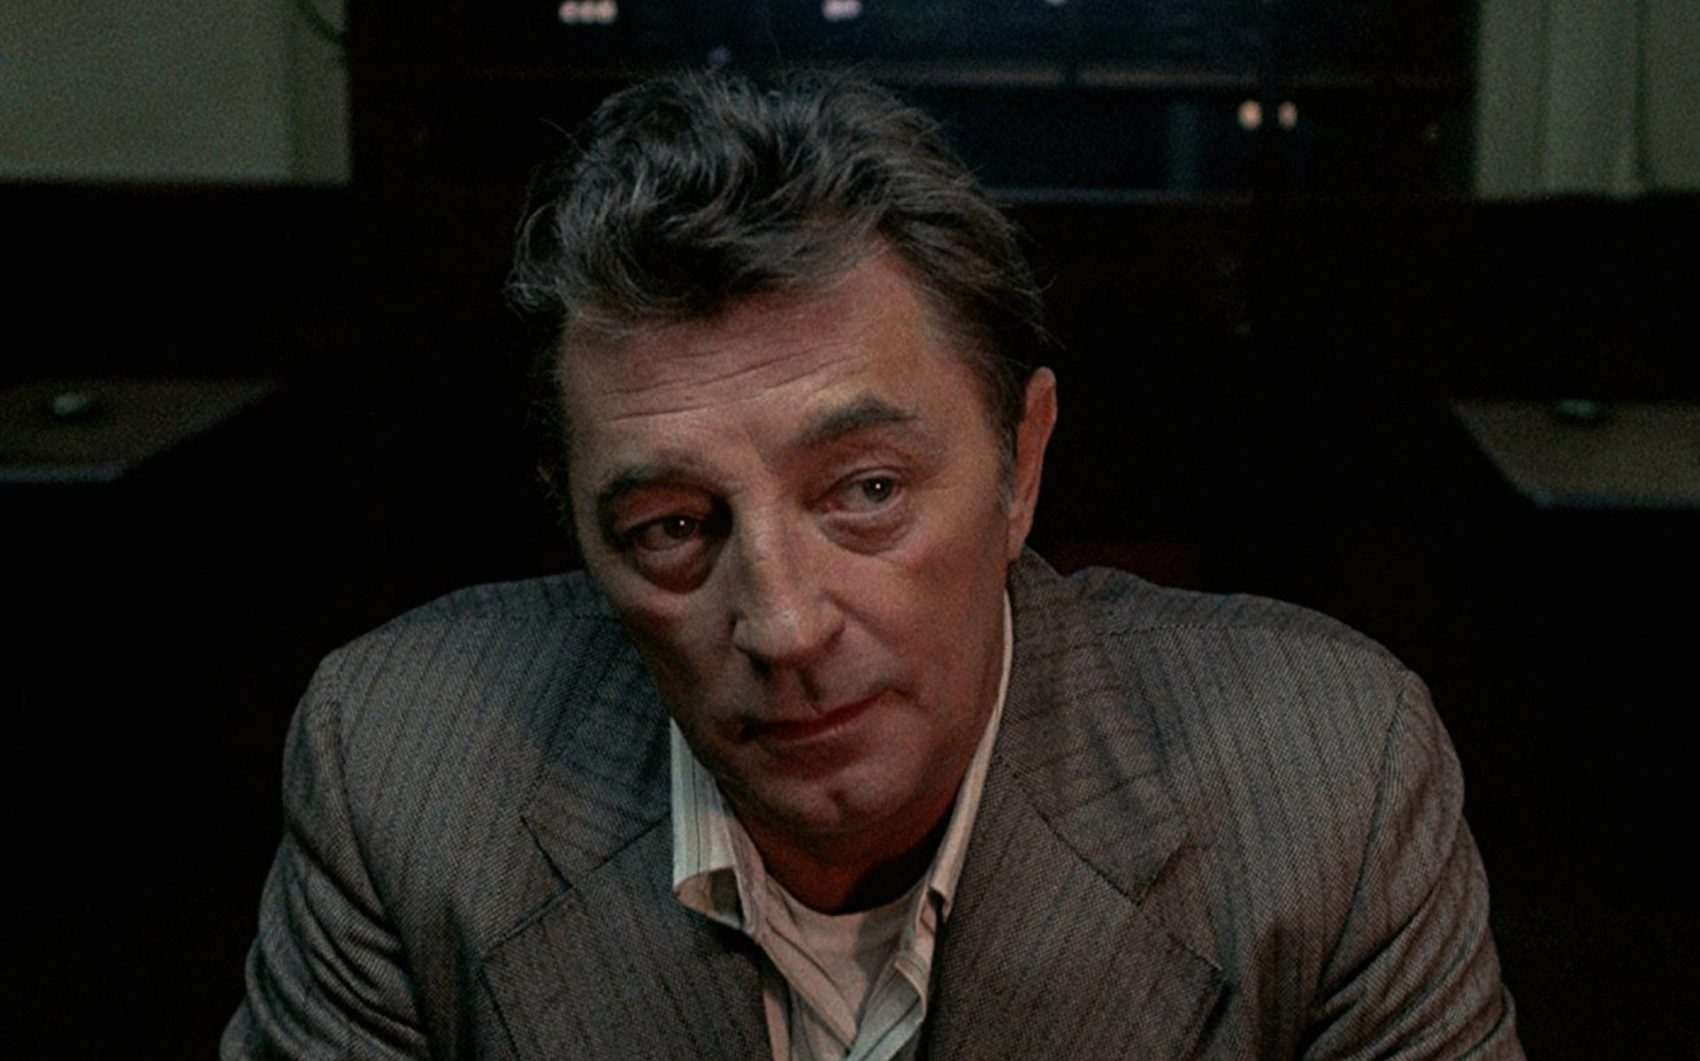 Robert Mitchum in the film "The Friends of Eddie Coyle." (Courtesy Criterion Collection)